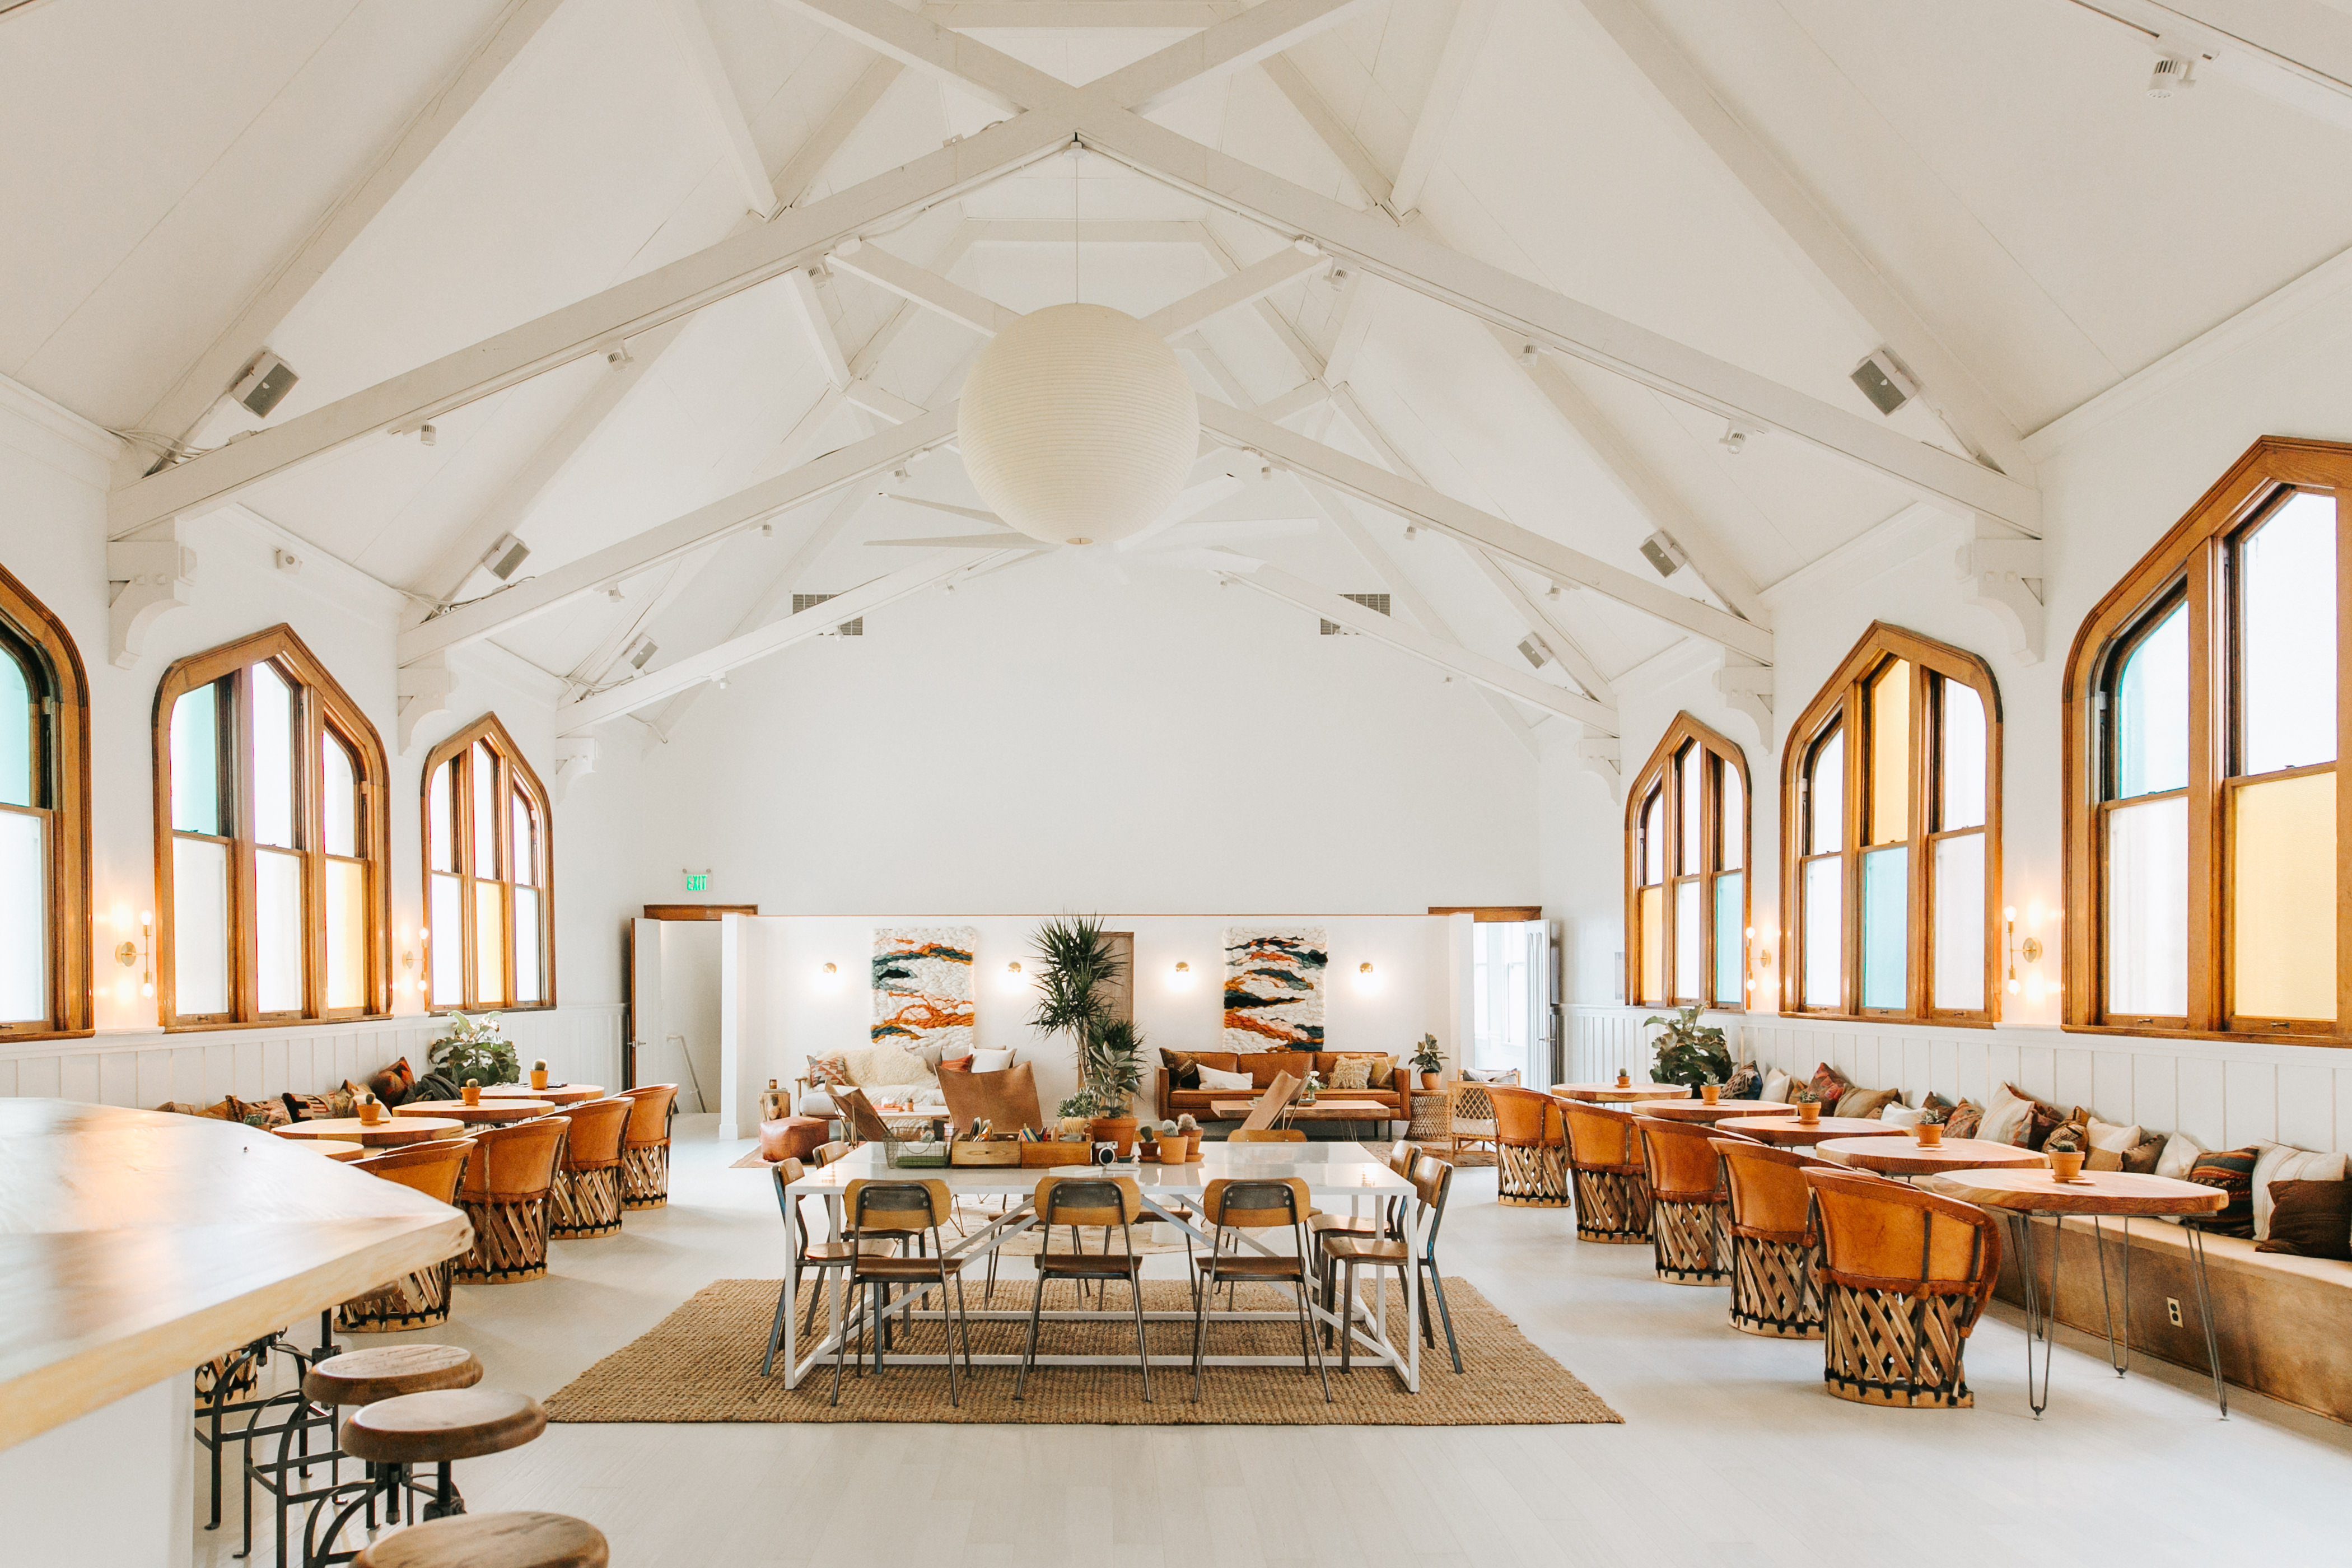 The interior of the co-working space The Assembly in San Francisco’s Mission District. There are multiple chairs and tables. The ceilings are high with white structural beams. There are multiple windows.